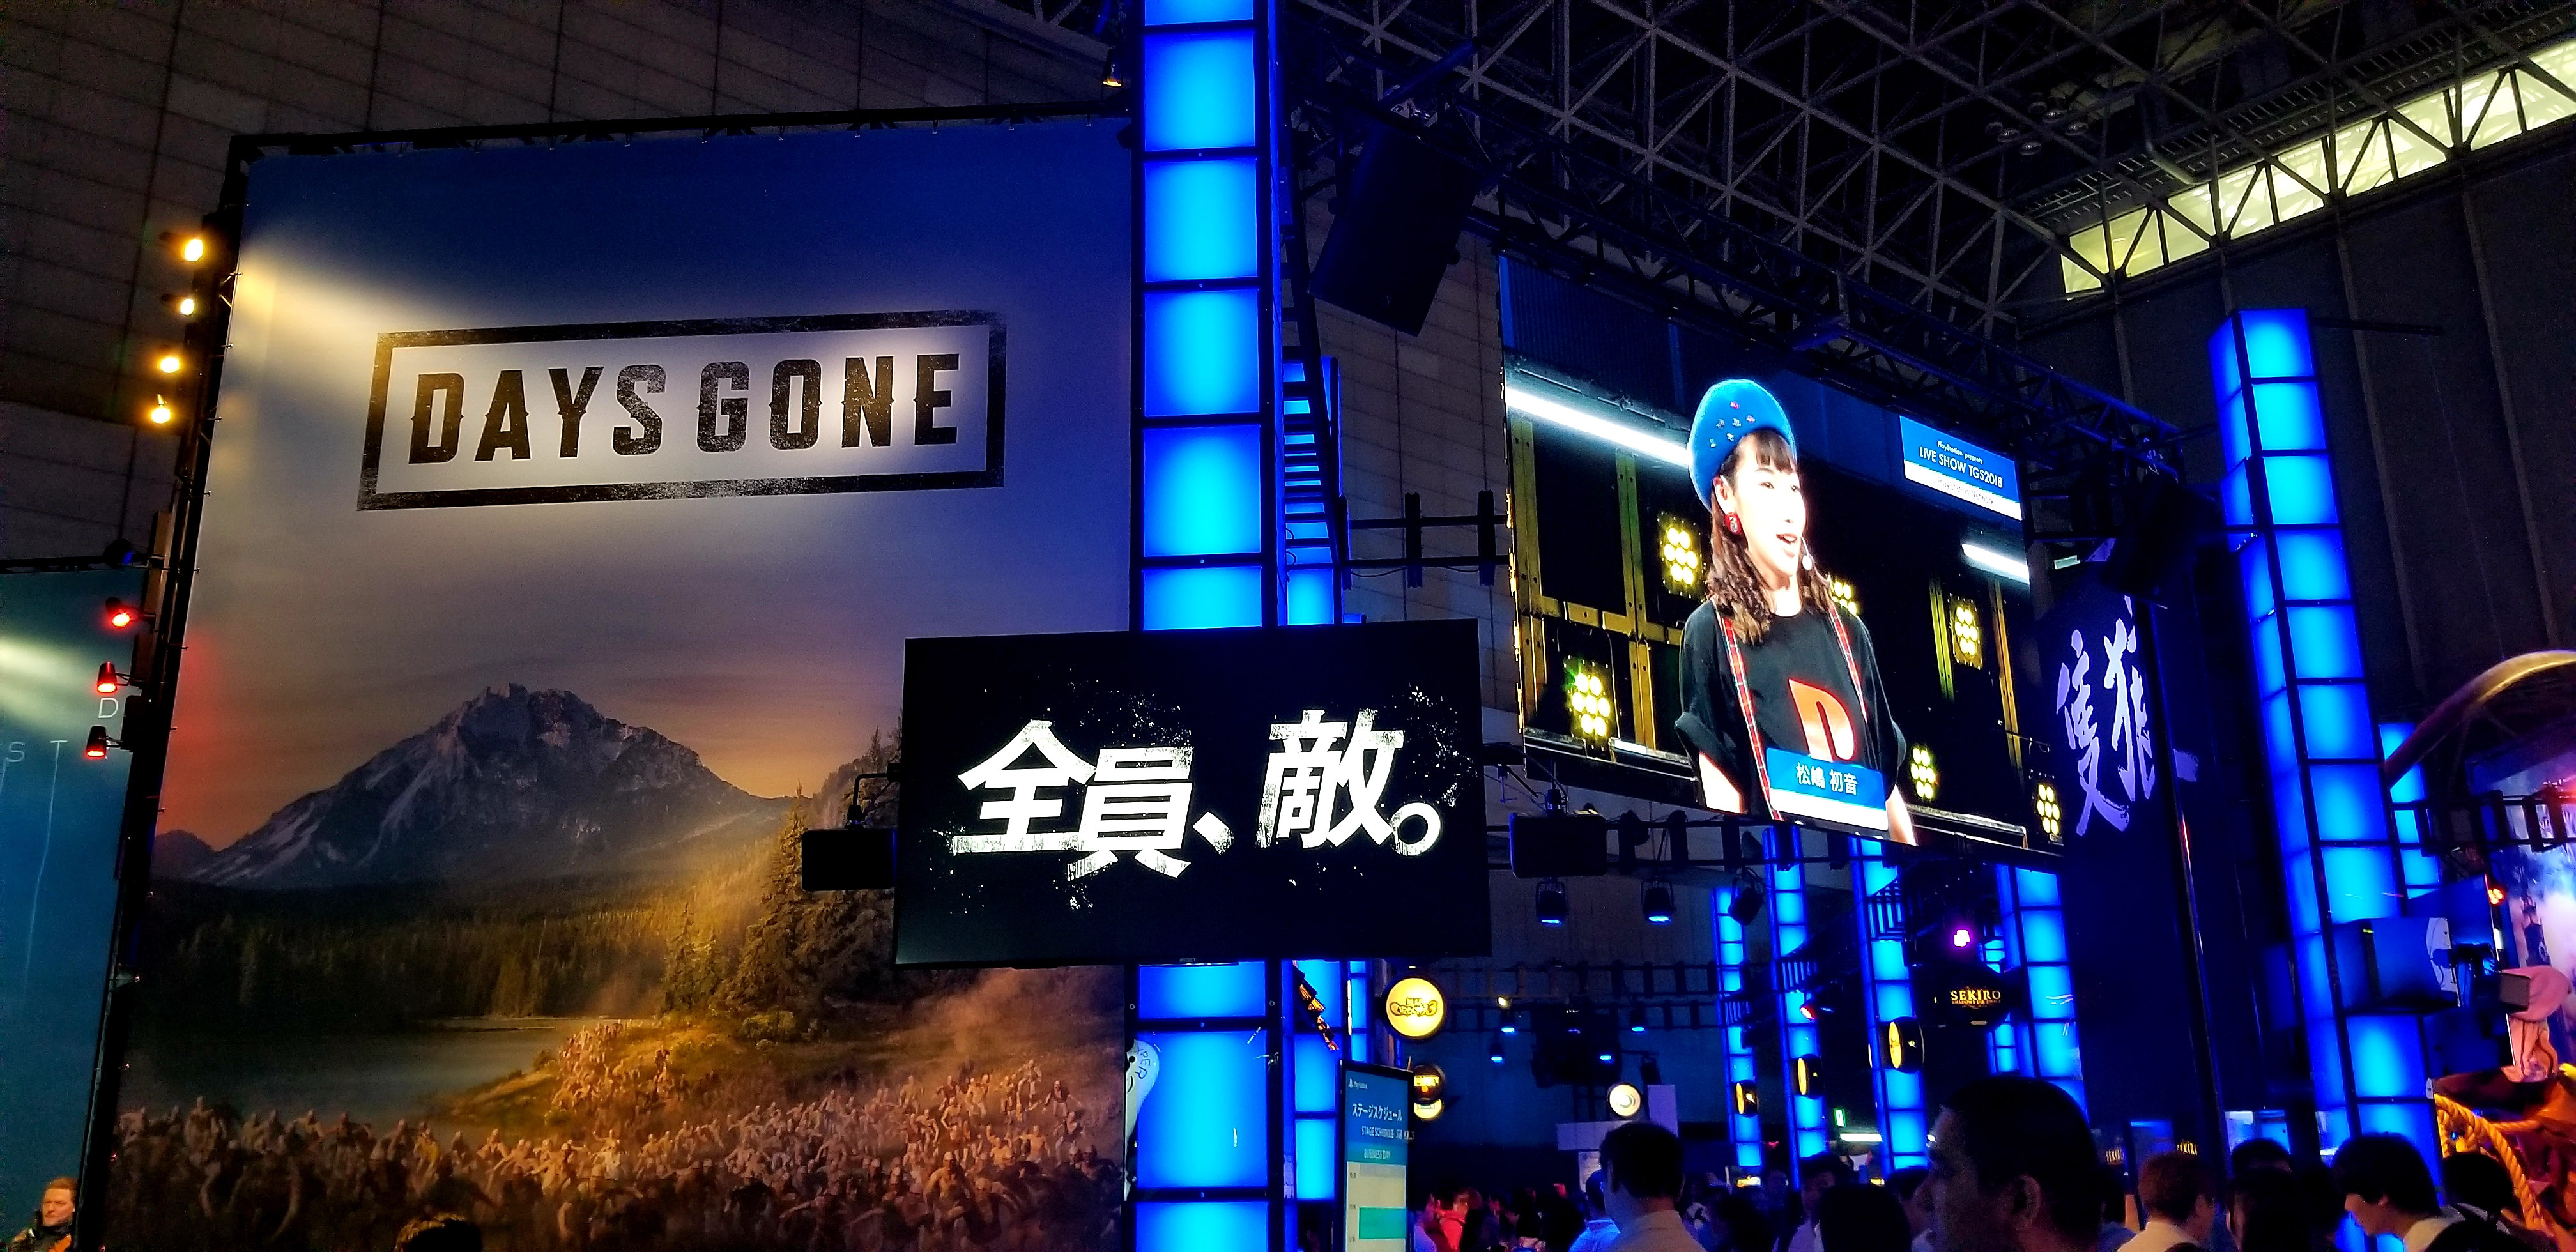 Days Gone at the Tokyo Game Show 2018